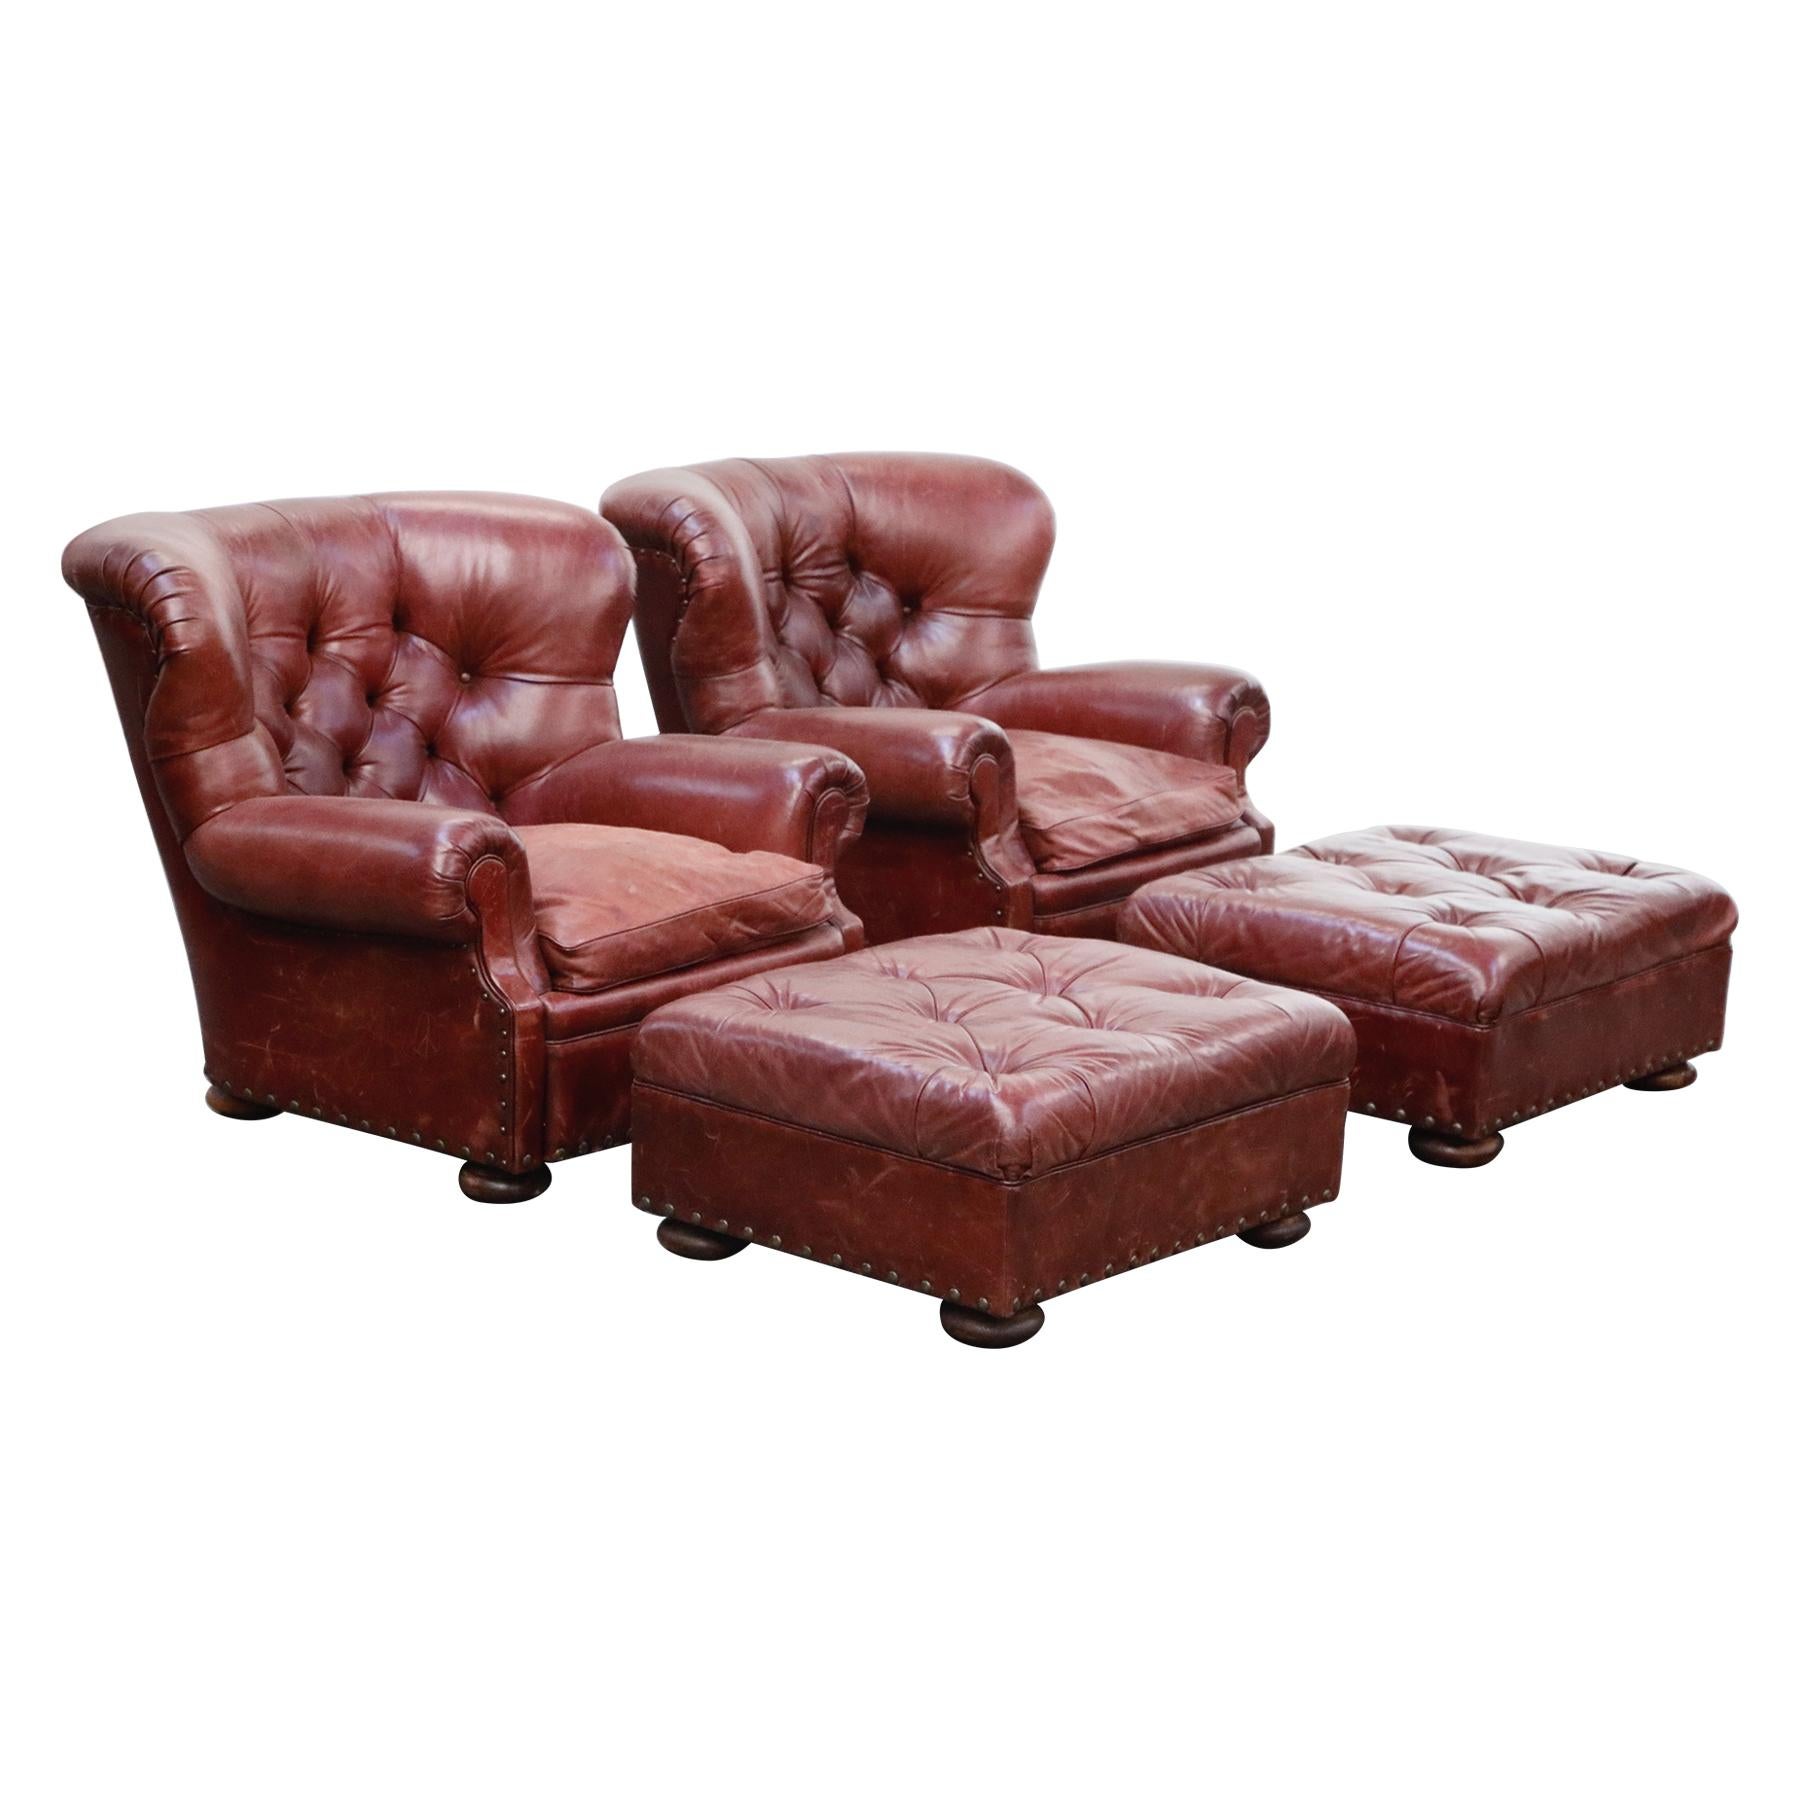 Set of Ralph Lauren Burgundy Leather Writer's Club Chairs and Ottomans, Signed